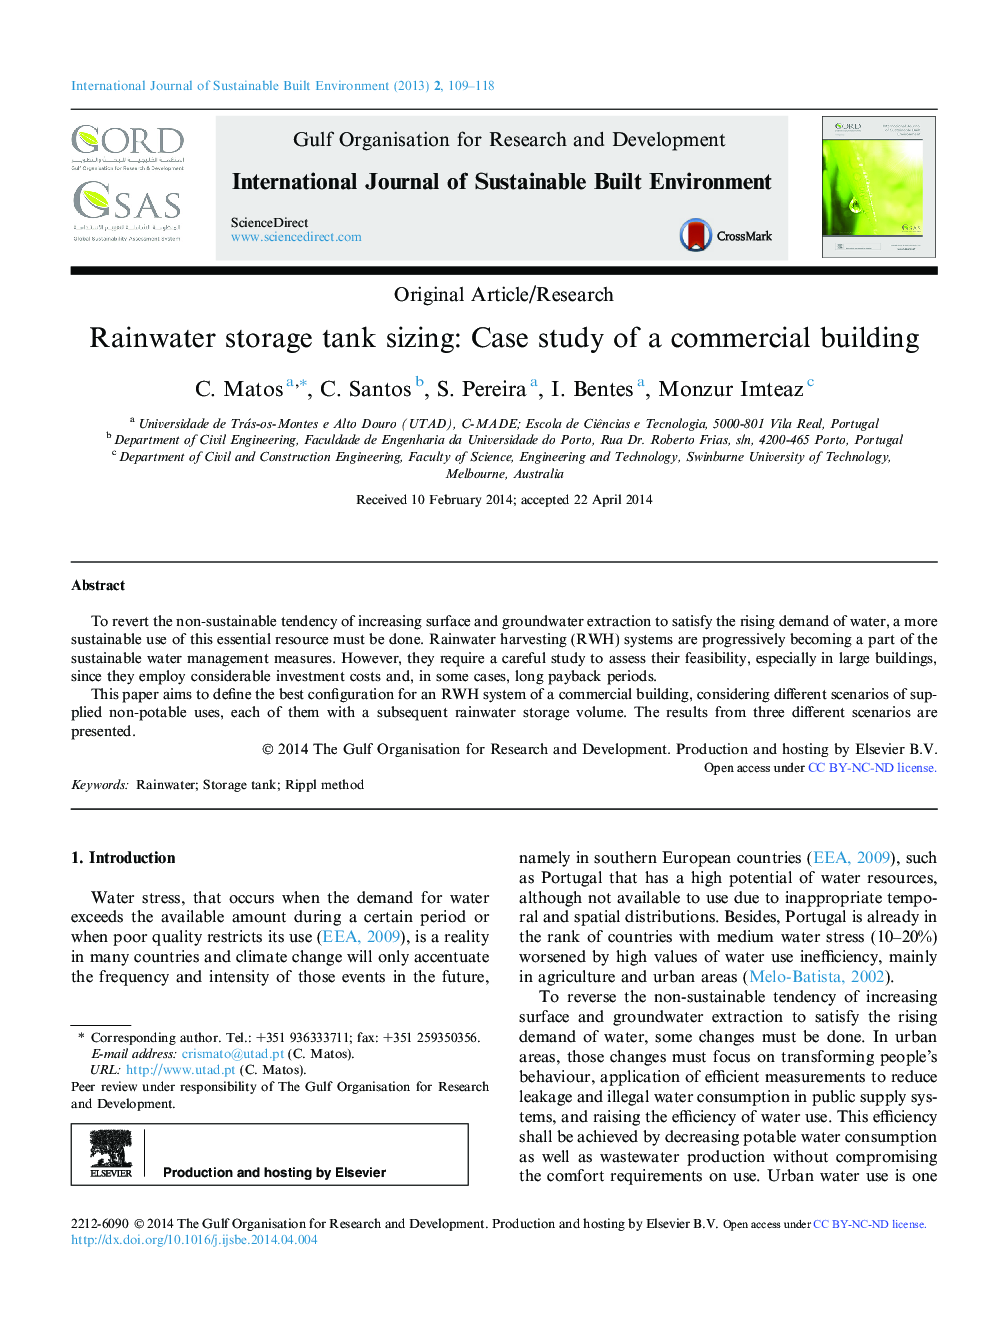 Rainwater storage tank sizing: Case study of a commercial building 